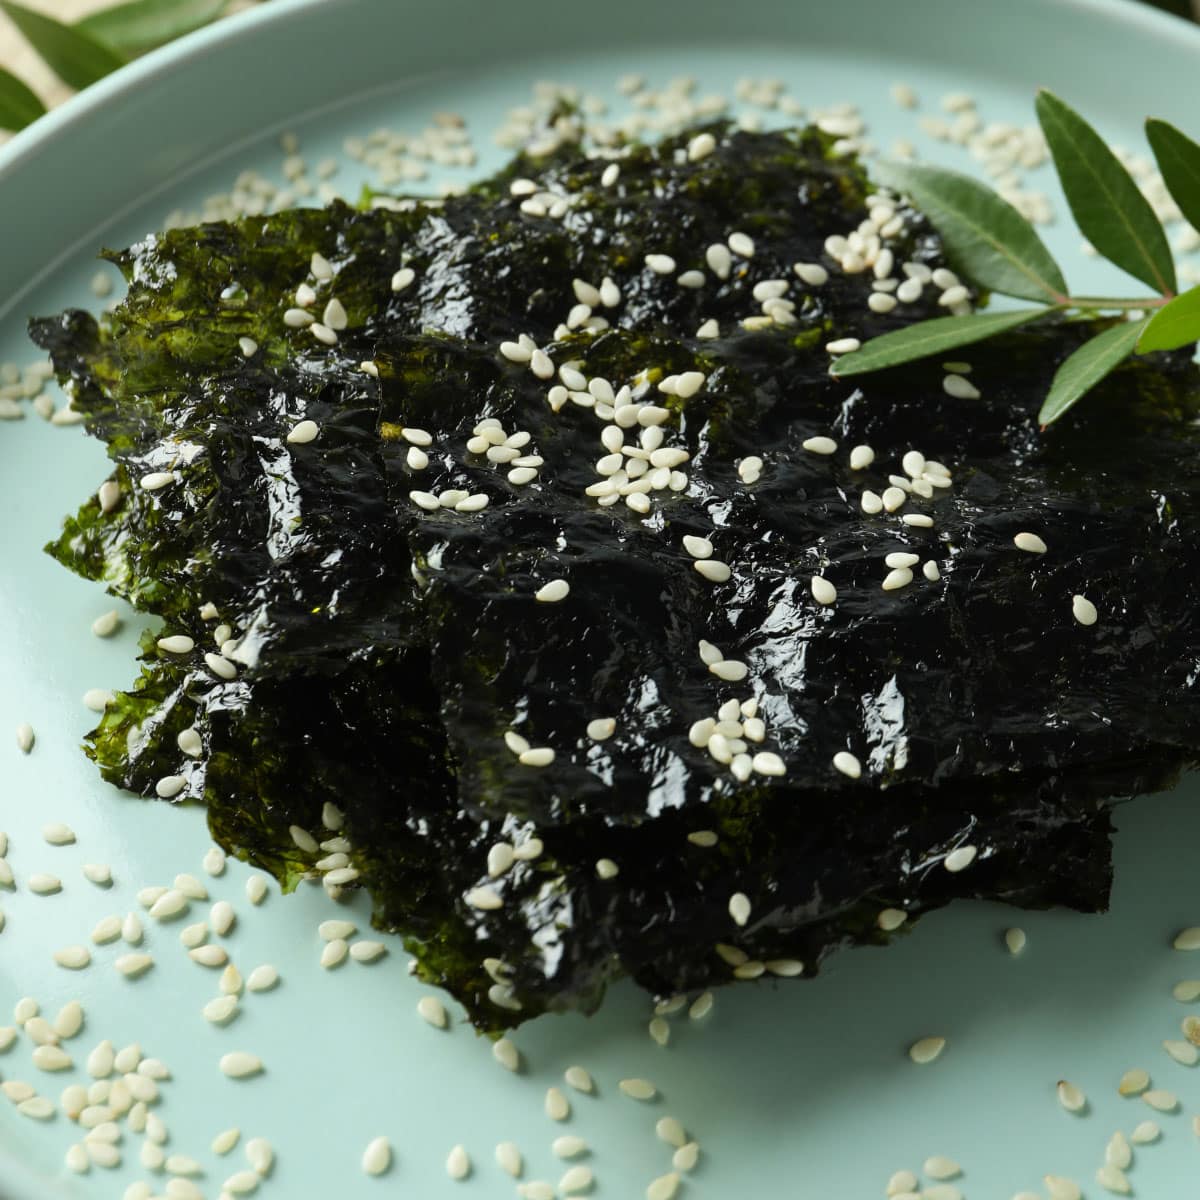 Homemade seaweed chips: Learn the secrets to achieving the perfect texture, seasoning, and storage, while exploring creative flavor combinations.